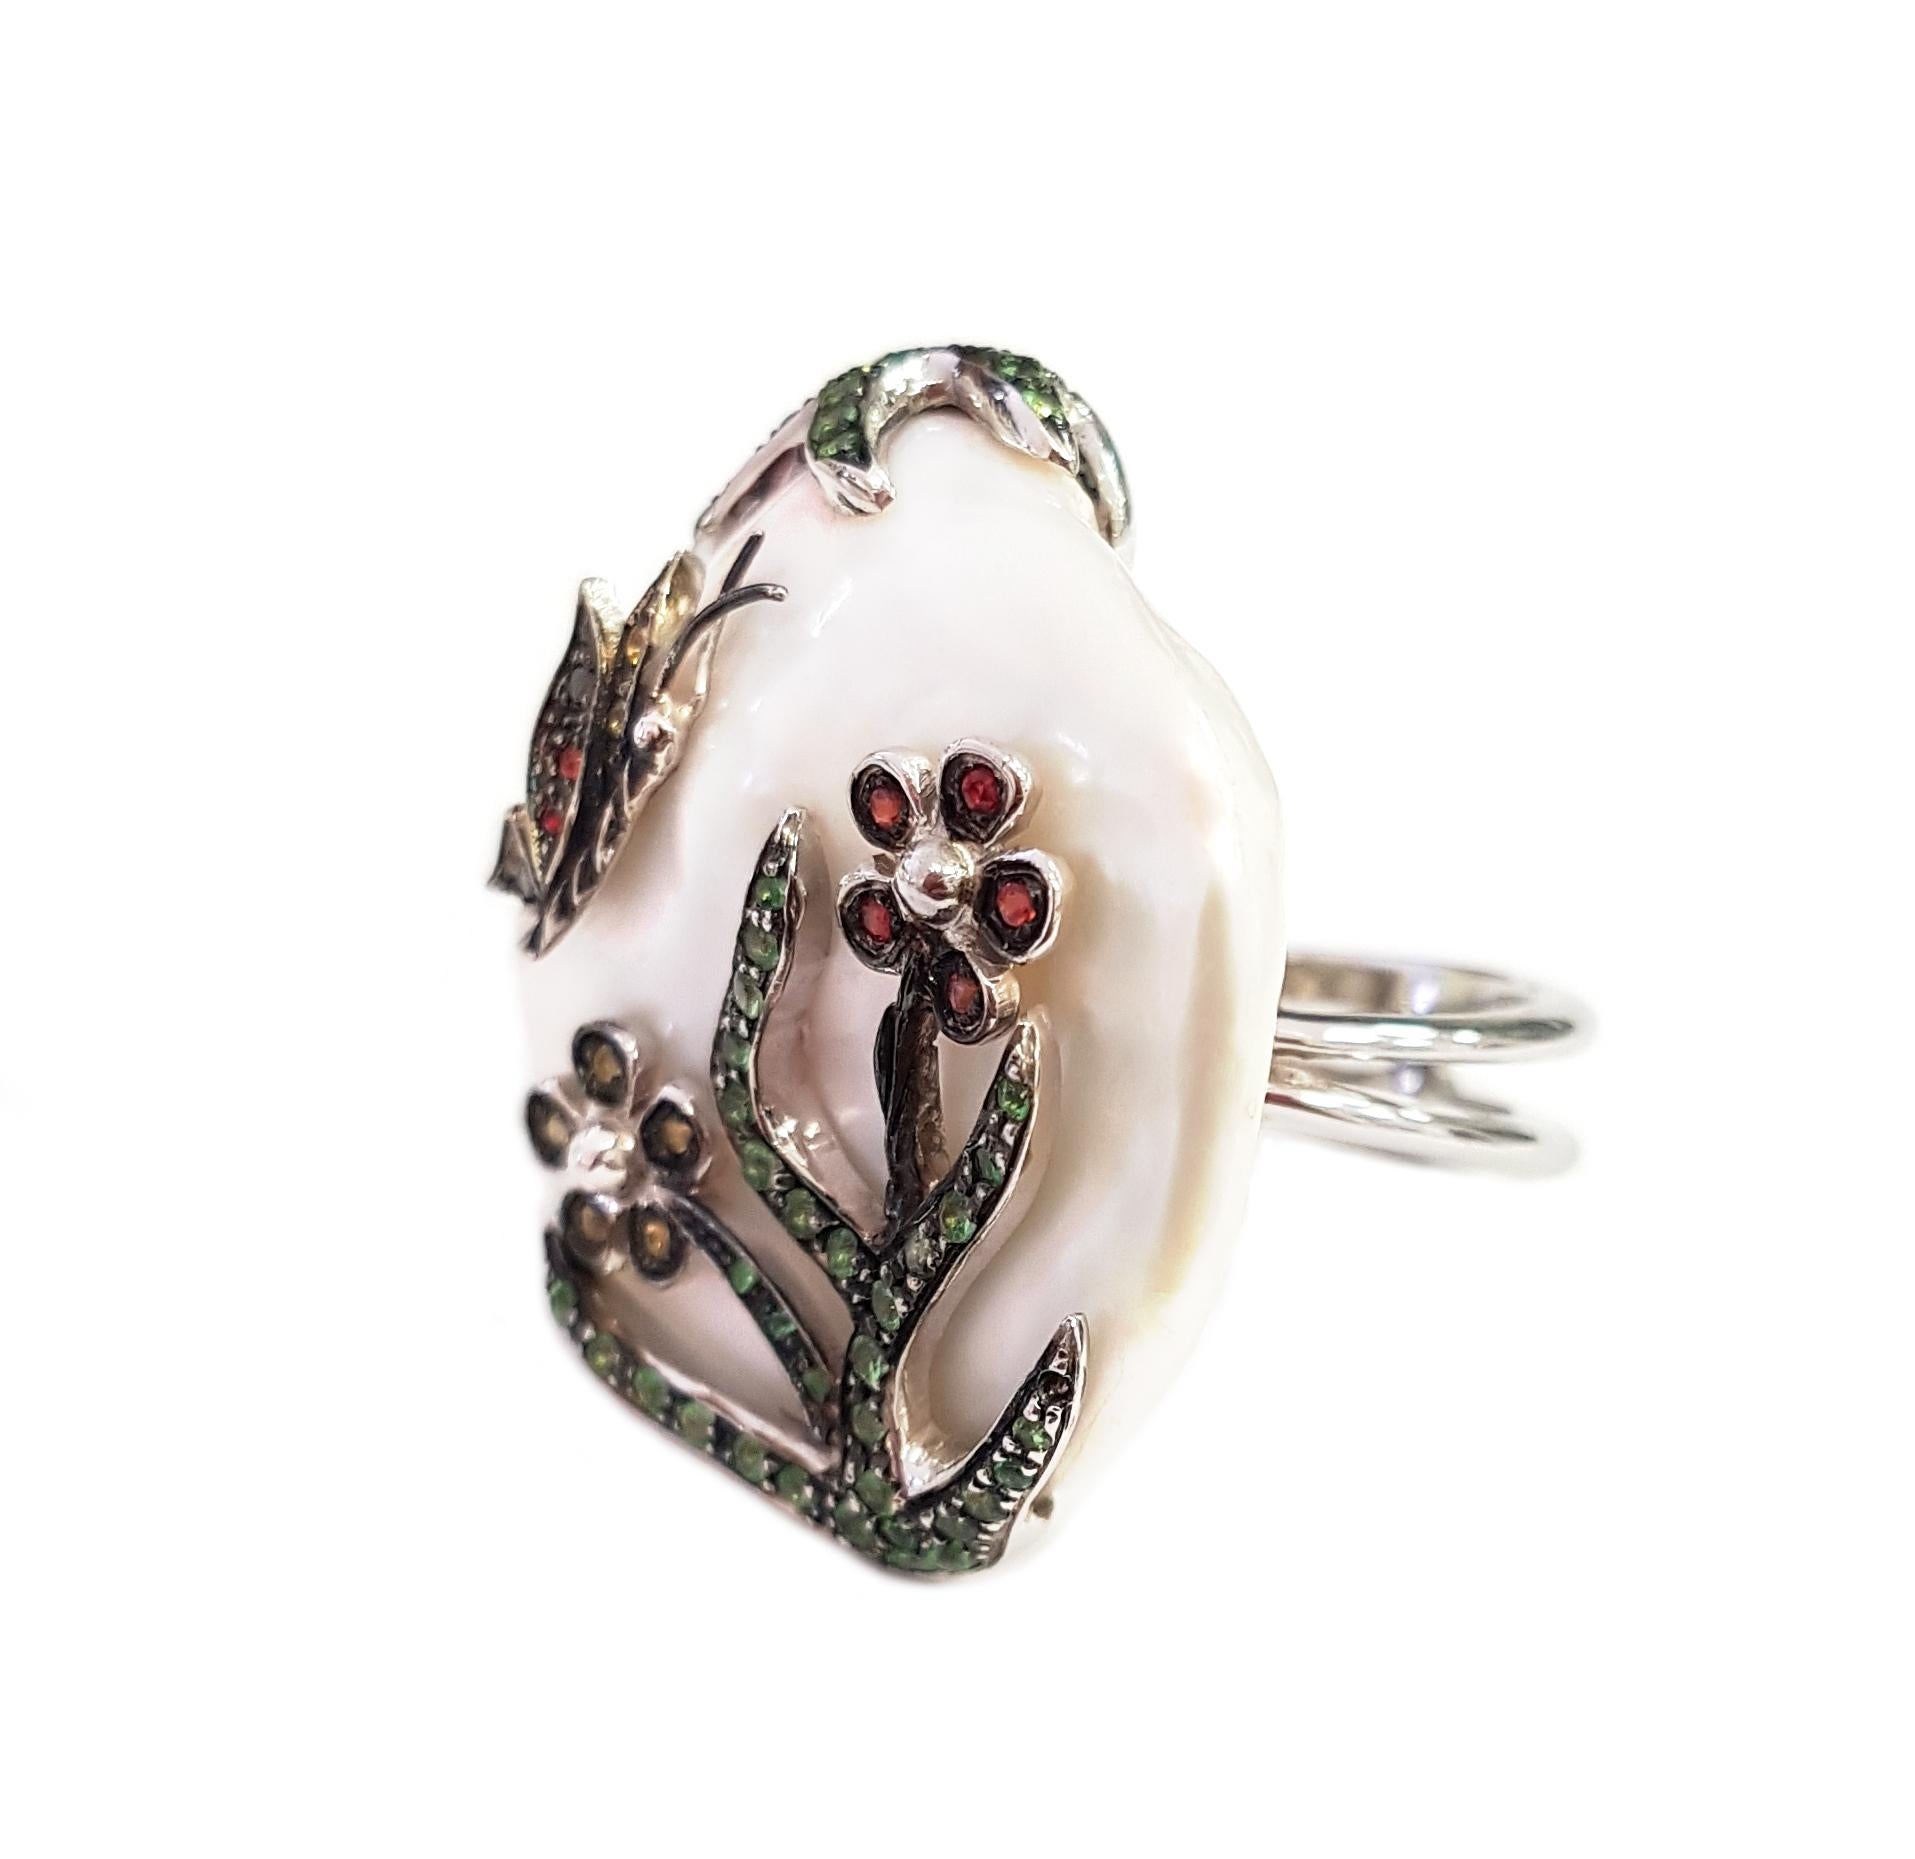 This gorgeous cocktail ring features a large luminous freshwater pearl, sapphires and tsavorites. A charming pastoral scene of spring plays out on the surface of the pearl; under the branch of a tree, bright green with new leaves, a butterfly flits